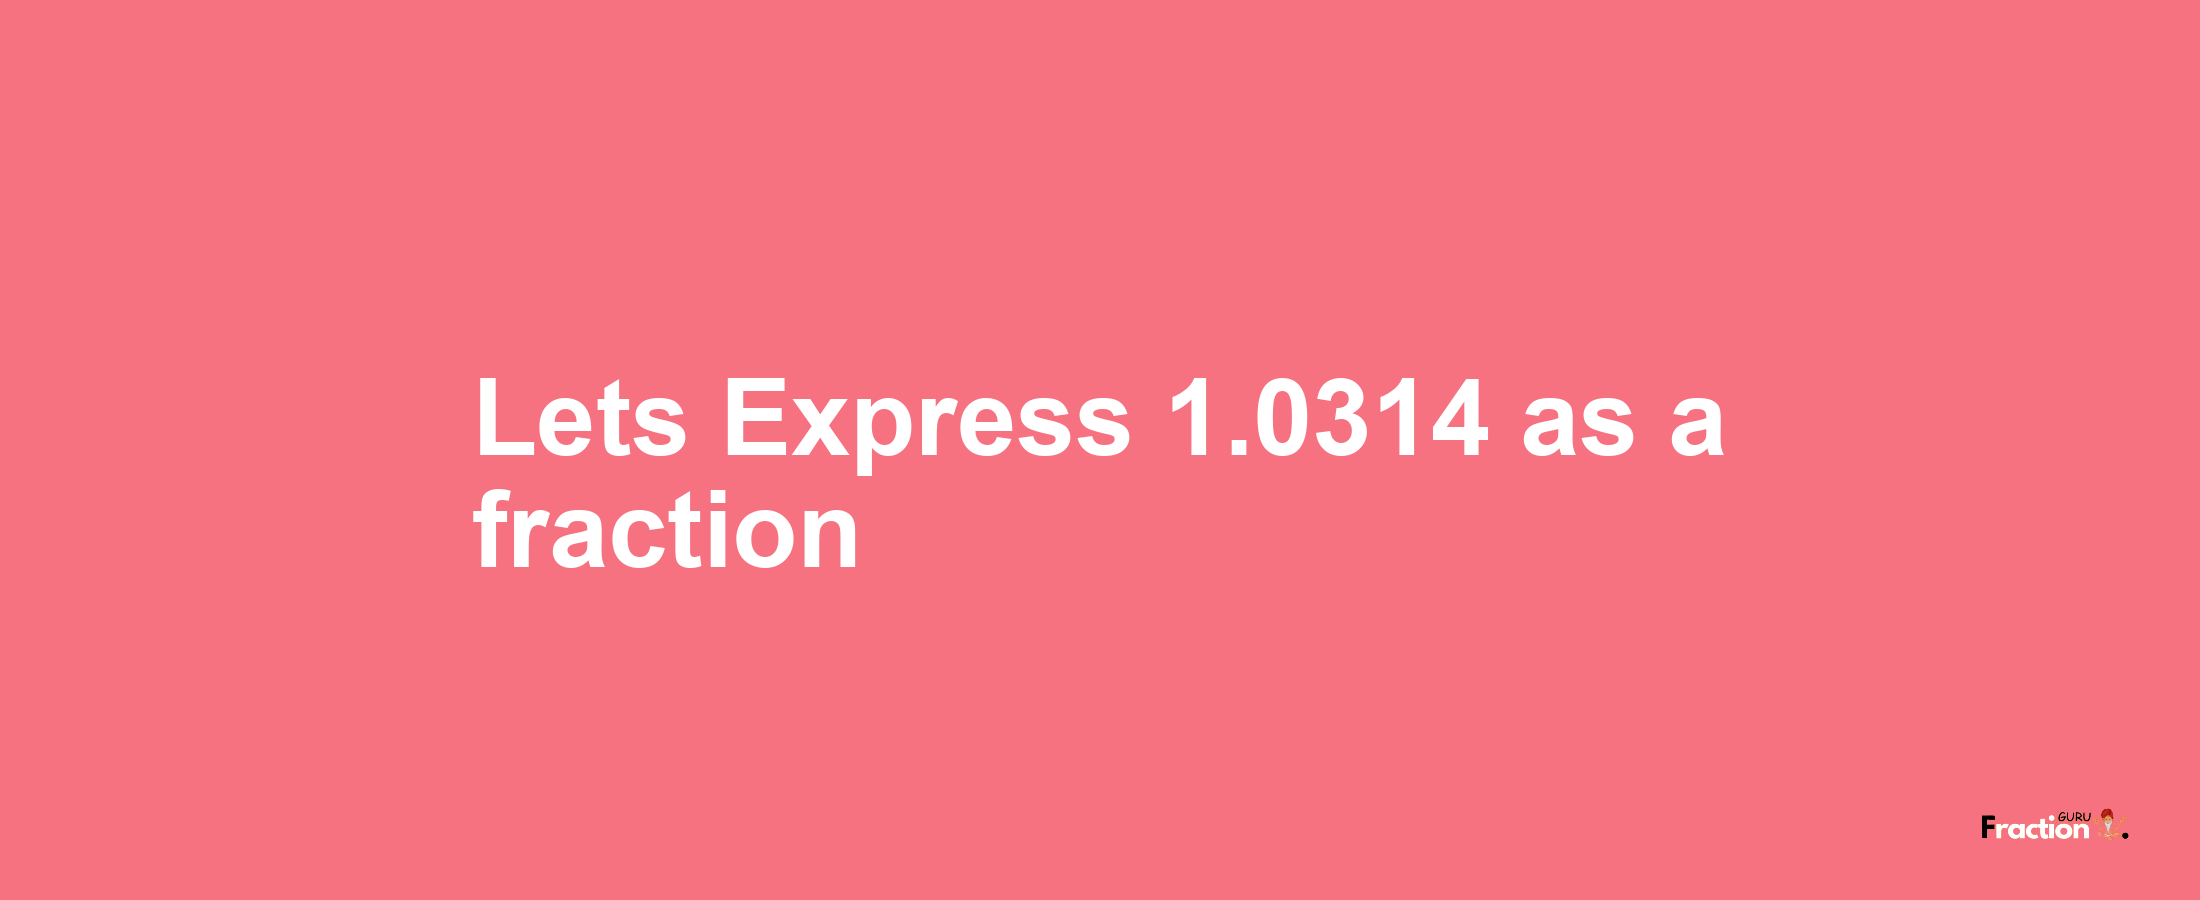 Lets Express 1.0314 as afraction